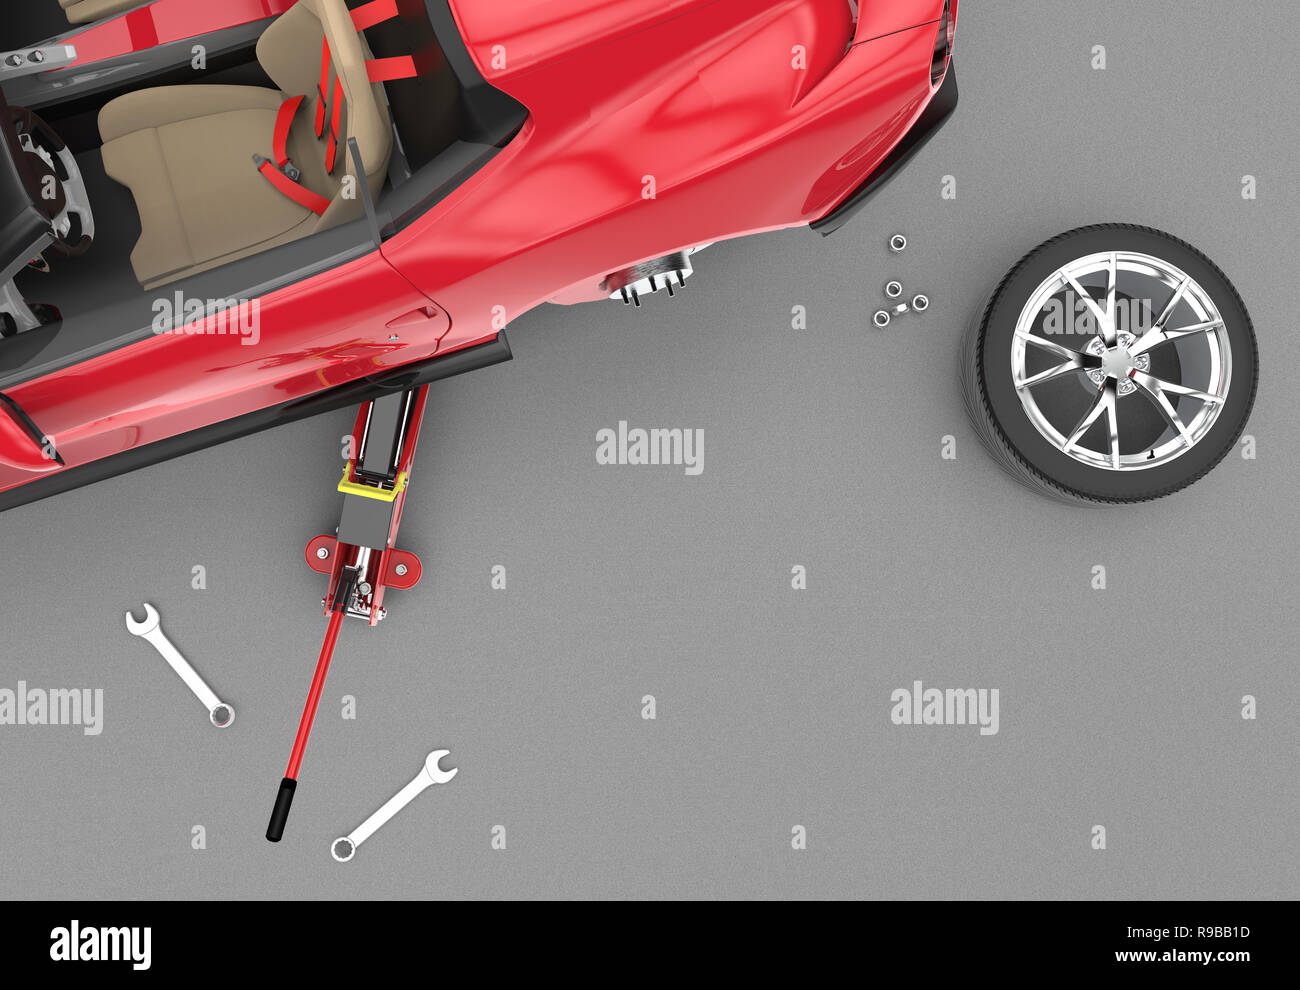 Top view of a car lifted with red hydraulic floor jack, 3D illustration Stock Photo